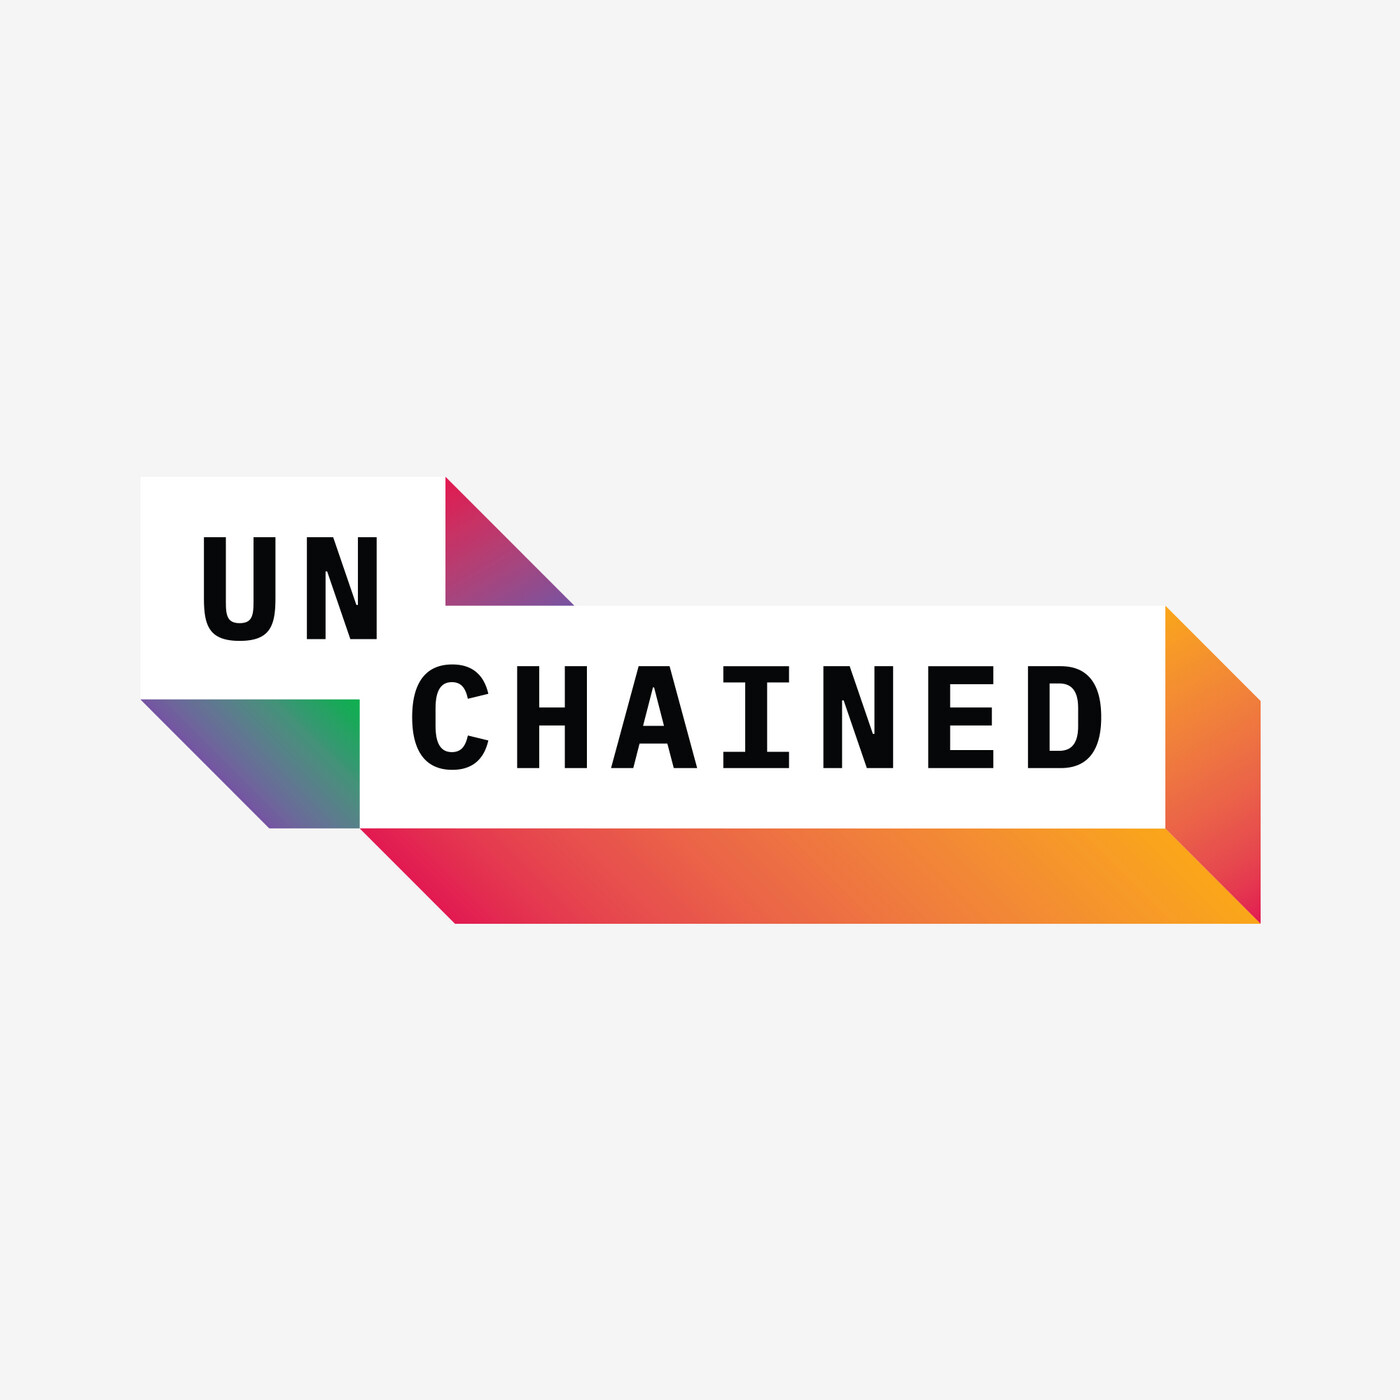 UNCHAINED: Apps on the TON Blockchain Have Become Extremely Popular. Is It Sustainable?